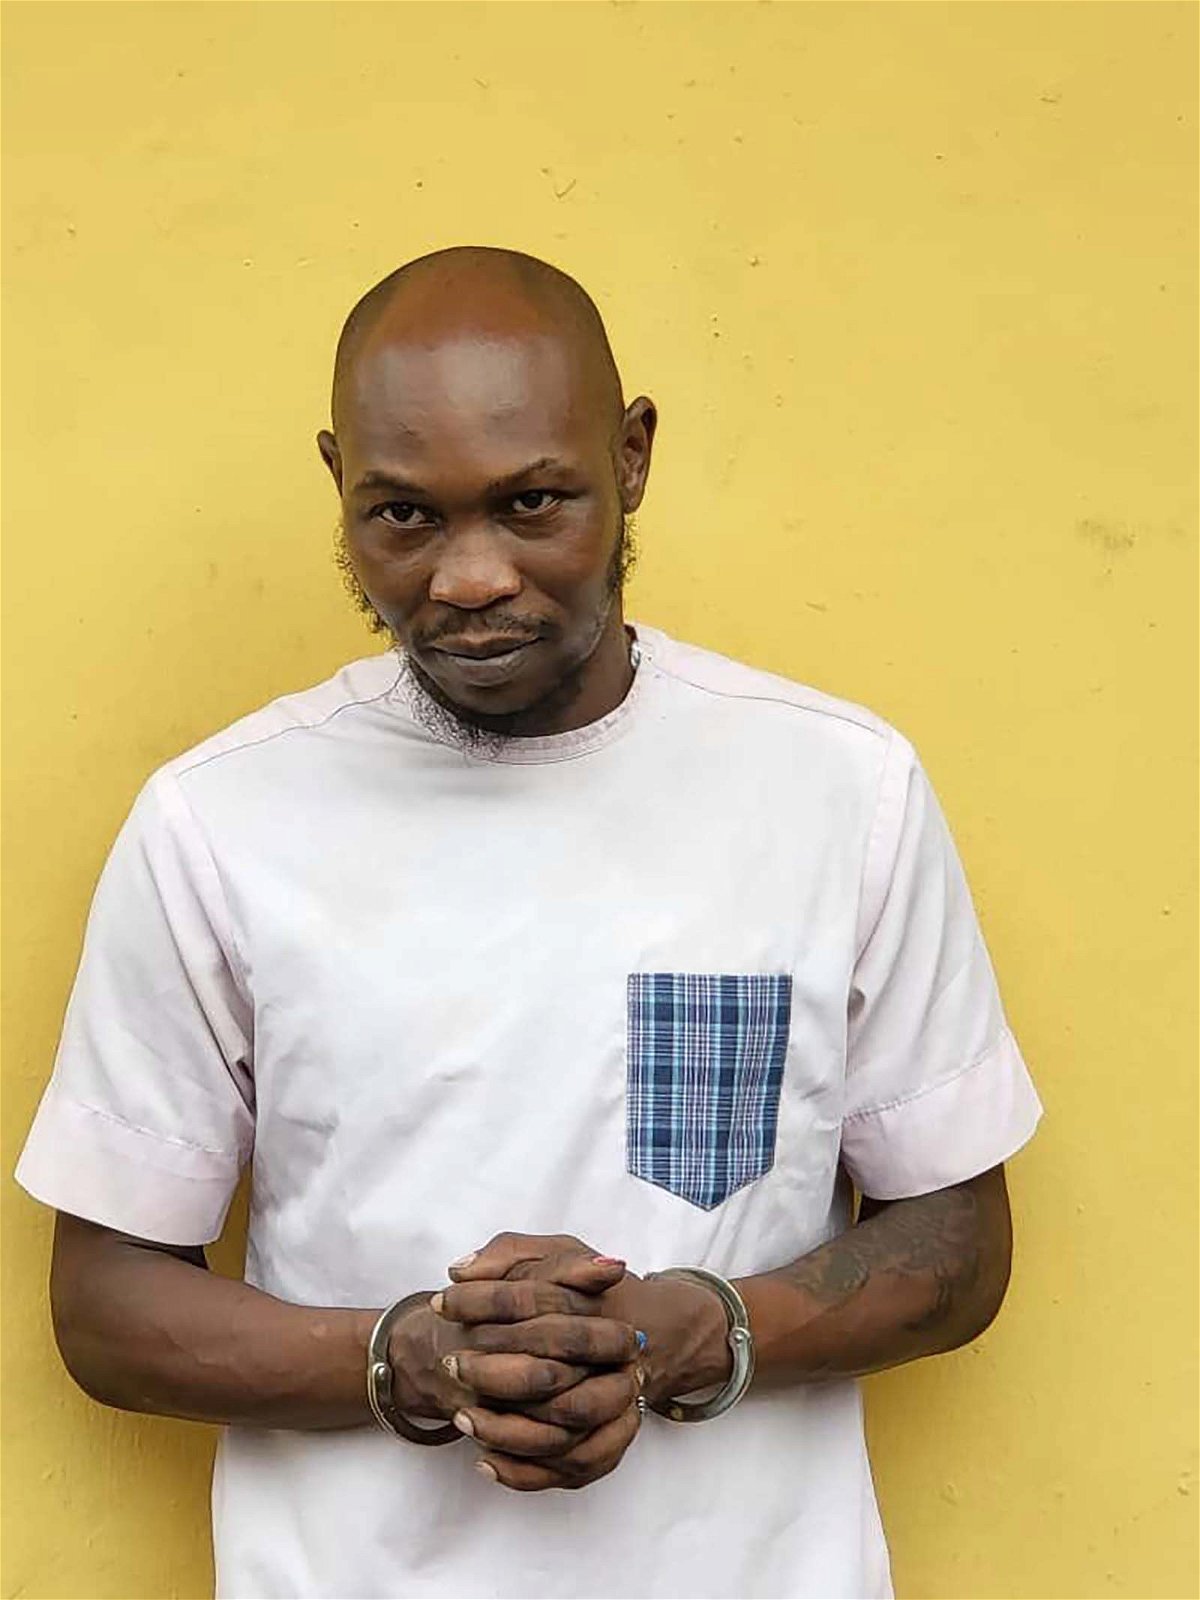 <i>Lagos State Police Command</i><br/>Seun Kuti turned himself in to authorities on Monday.